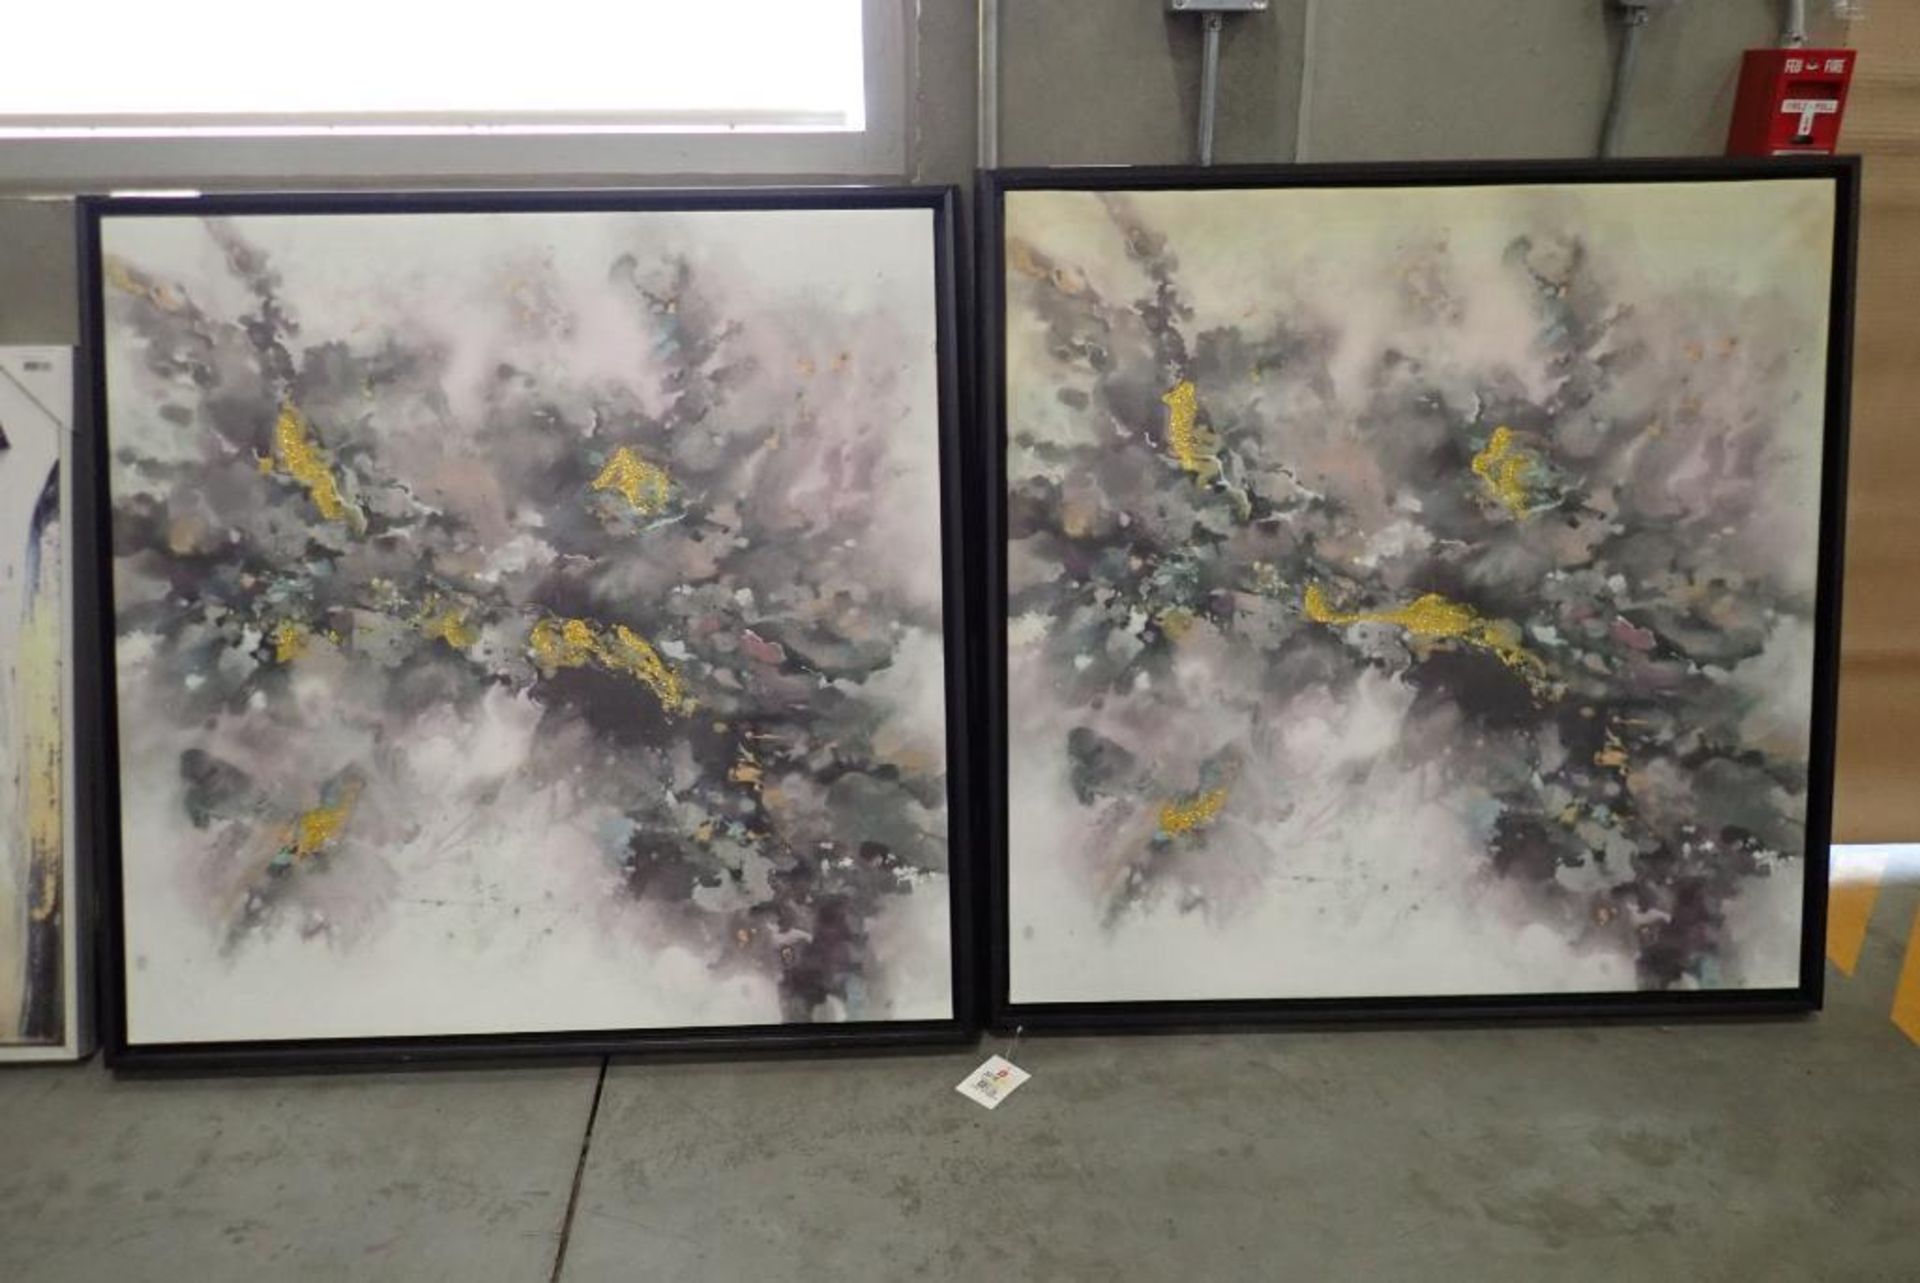 Lot of 2 Framed 38"x38" Canvas Pictures- Minor Damage.